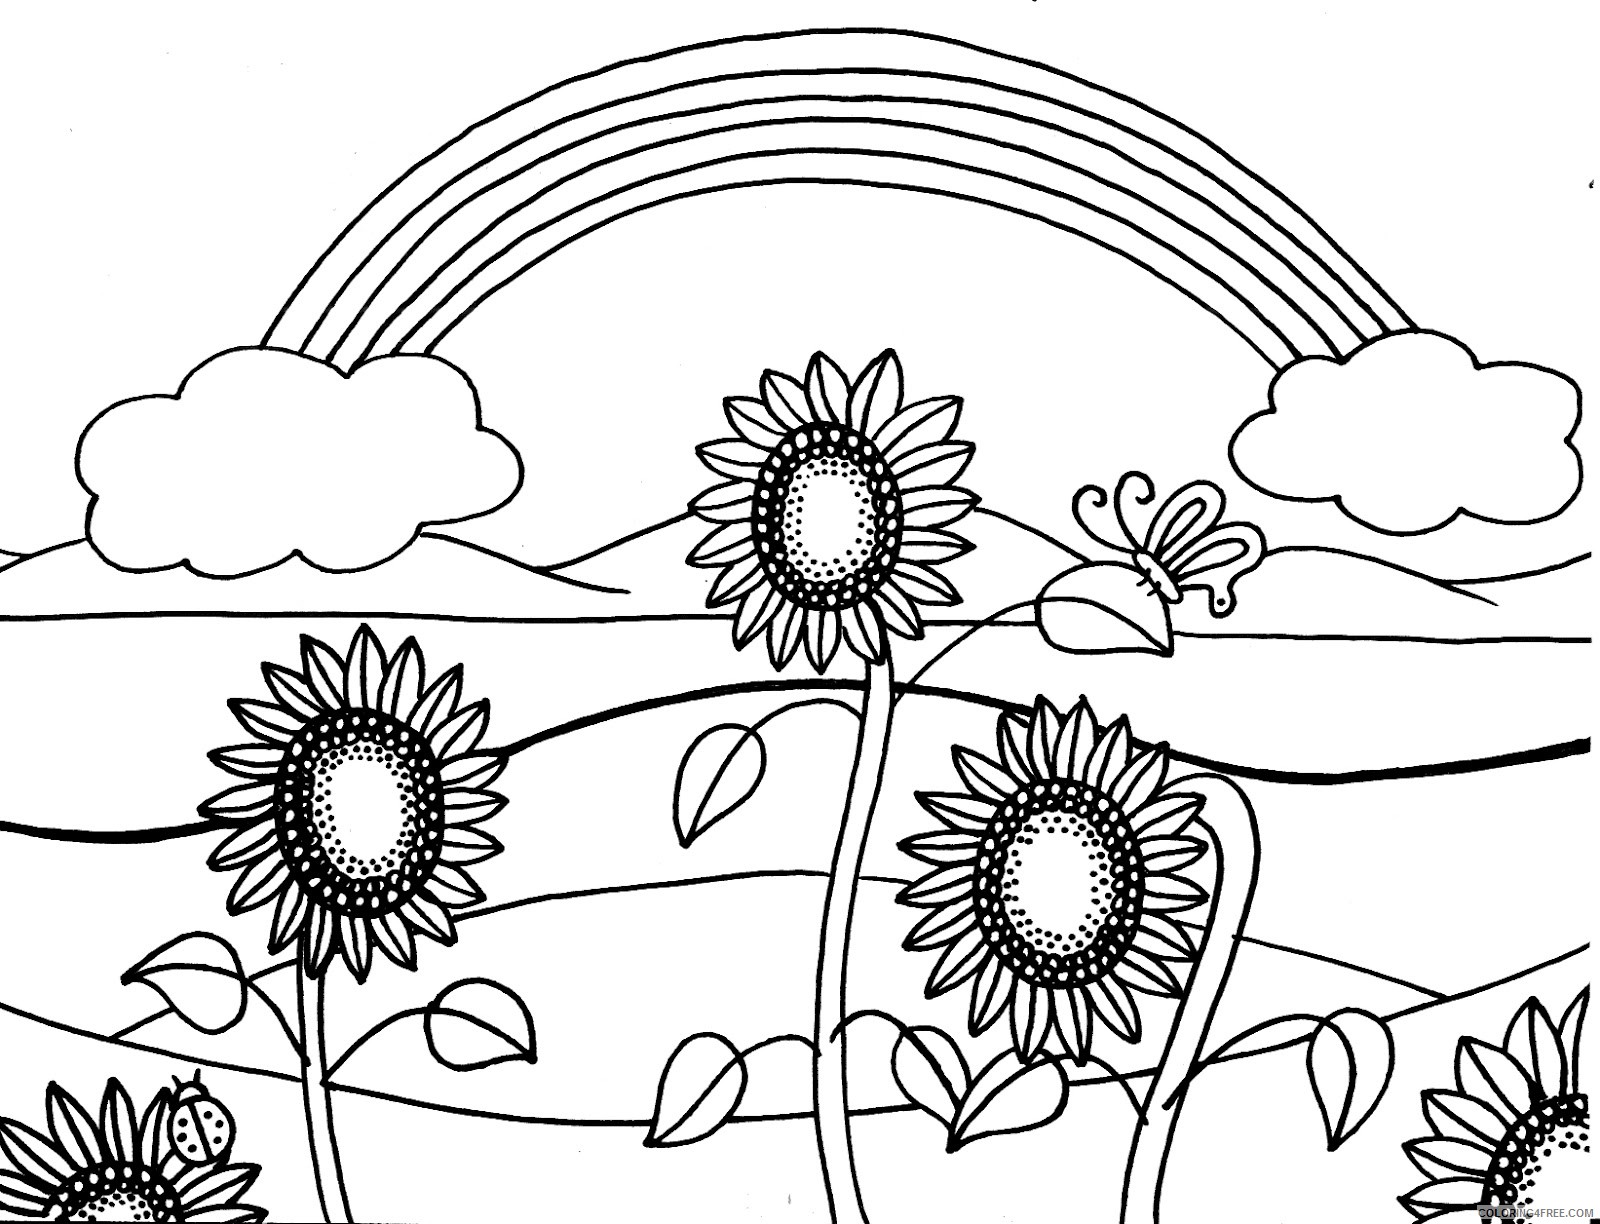 sunflower coloring pages with rainbow Coloring4free